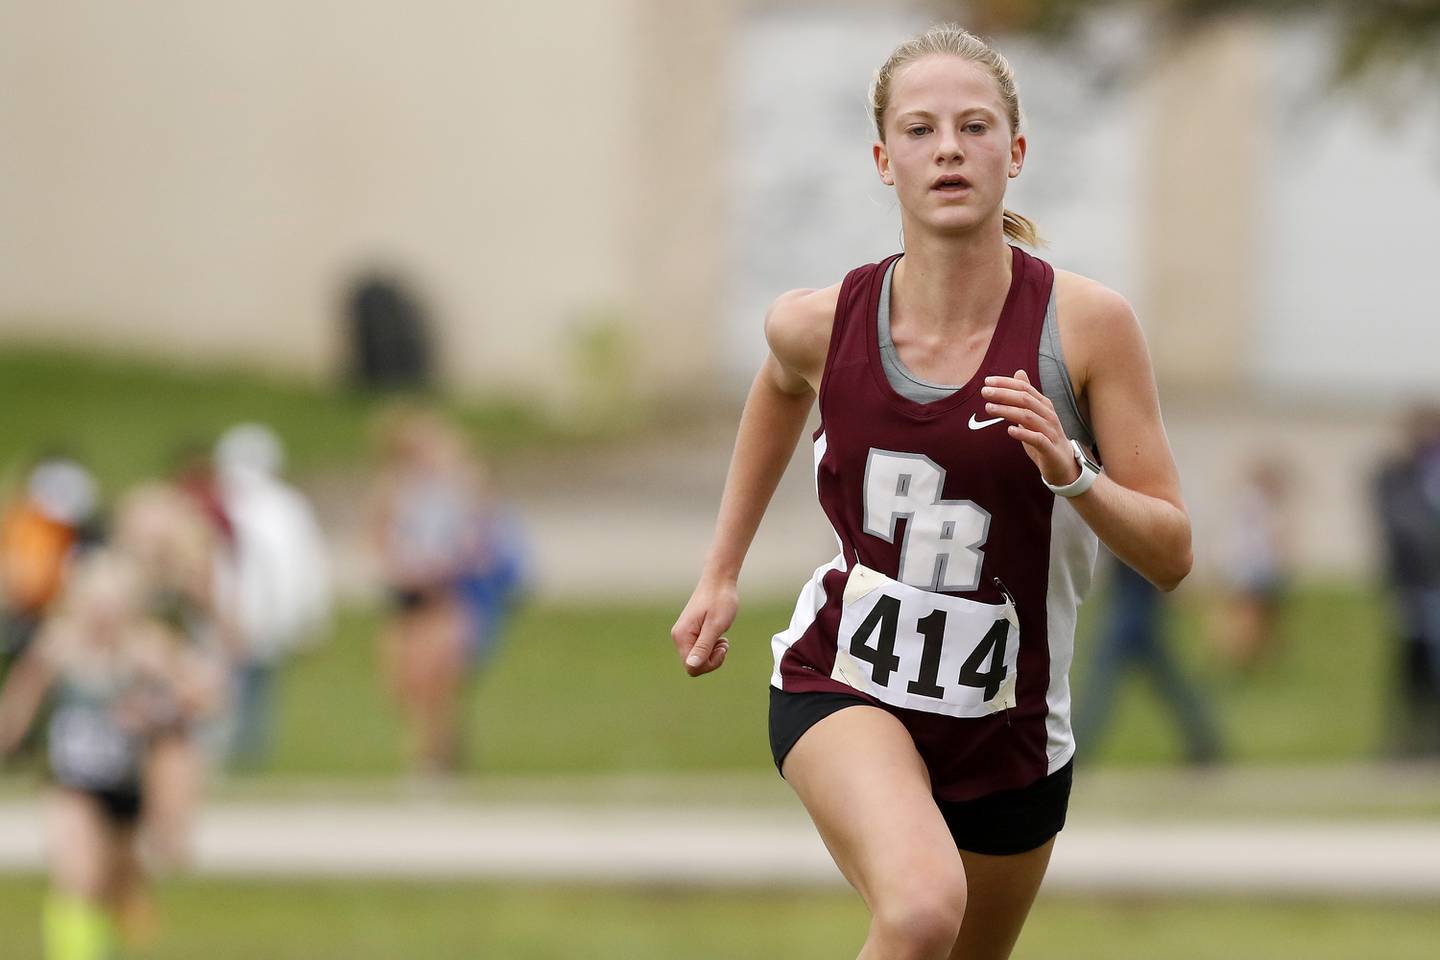 Prairie Ridge's Rachel Soukup heads for the finish line to place seventh during the girls Class 2A Woodstock North XC Sectional at Emricson Park on Saturday, Oct. 30, 2021 in Woodstock.